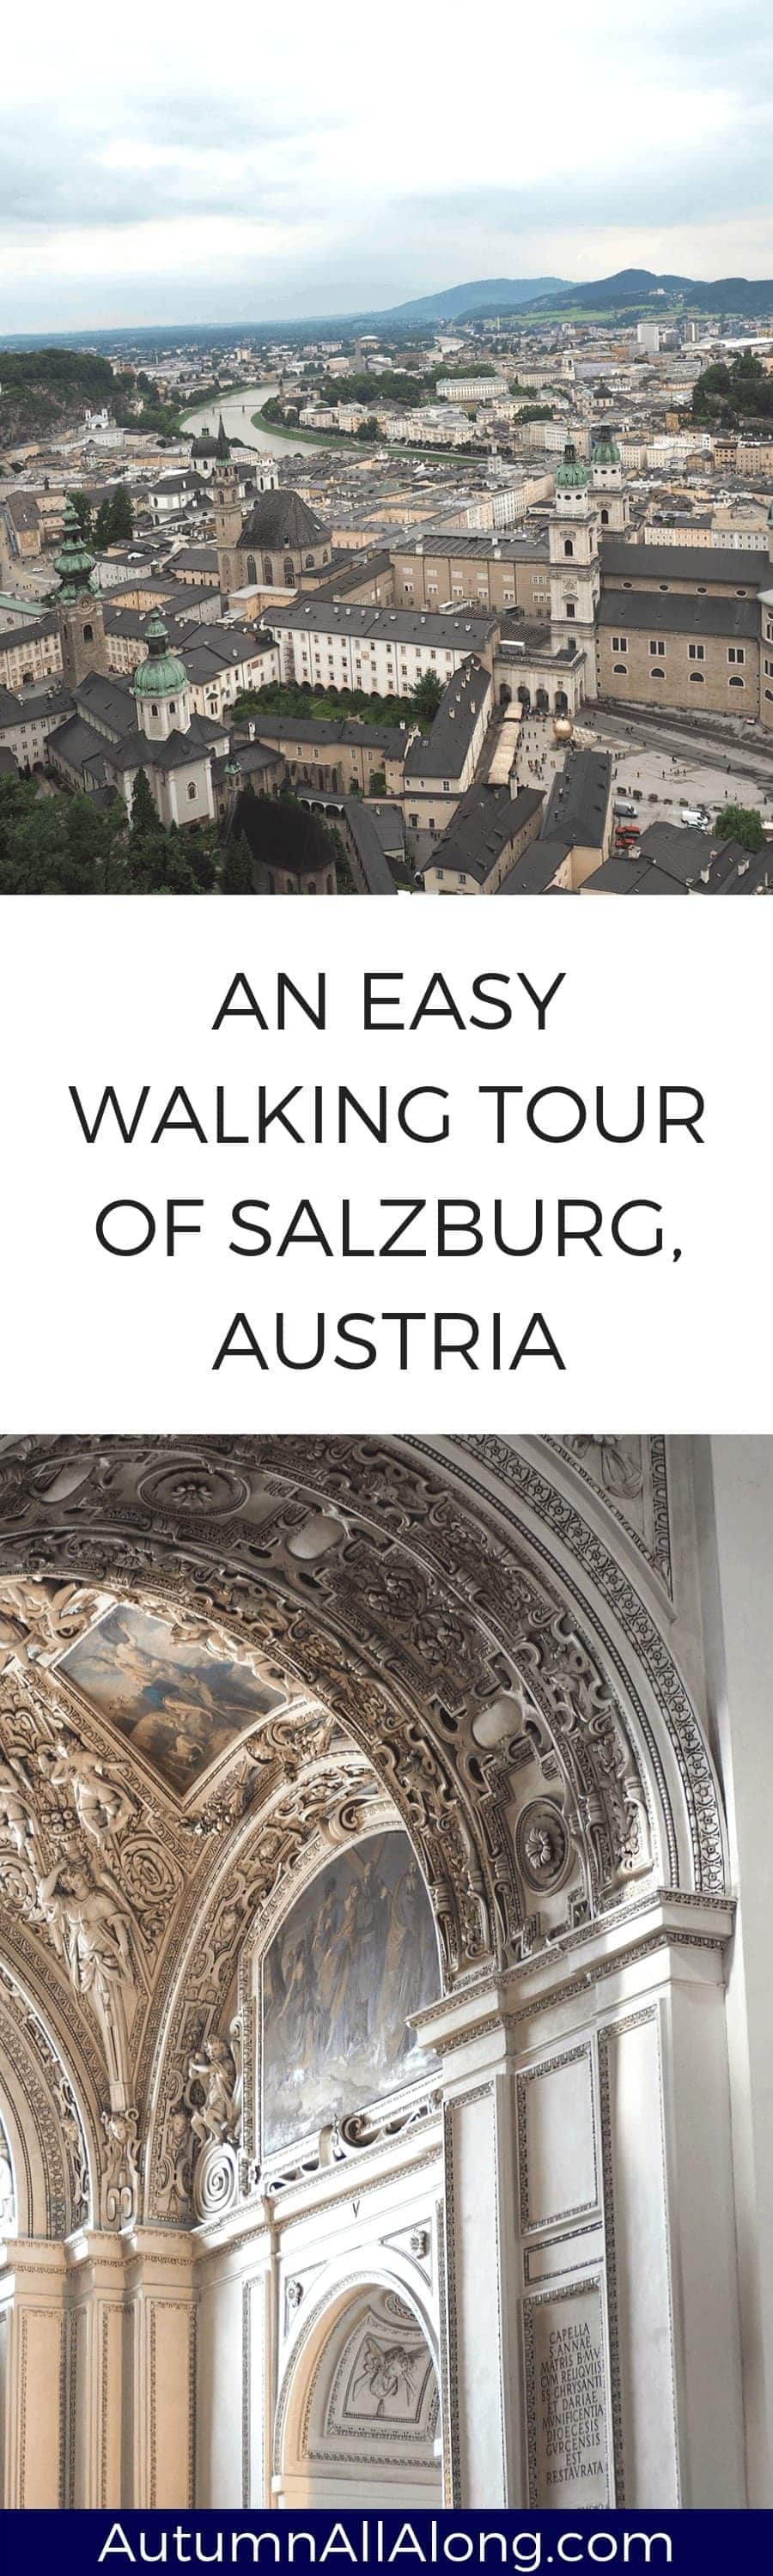 Our self-guided walking tour of Salzburg with our favorite details of our trip to Salzburg, Austria. | via Autumn All Along